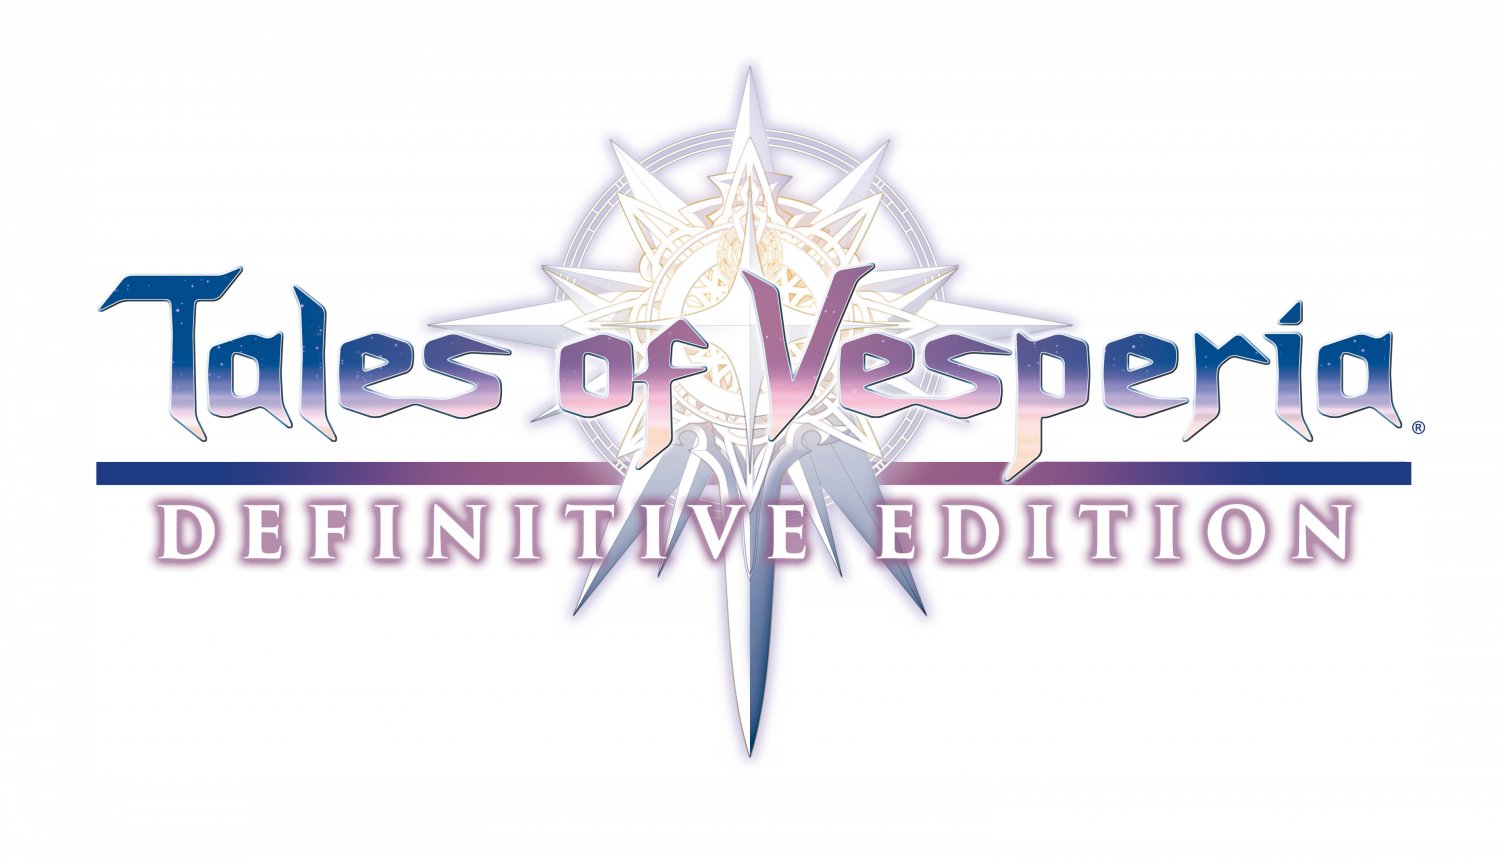 Tales of Vesperia Definitive Edition Game 13"x19" (32cm/49cm) Polyester Fabric Poster